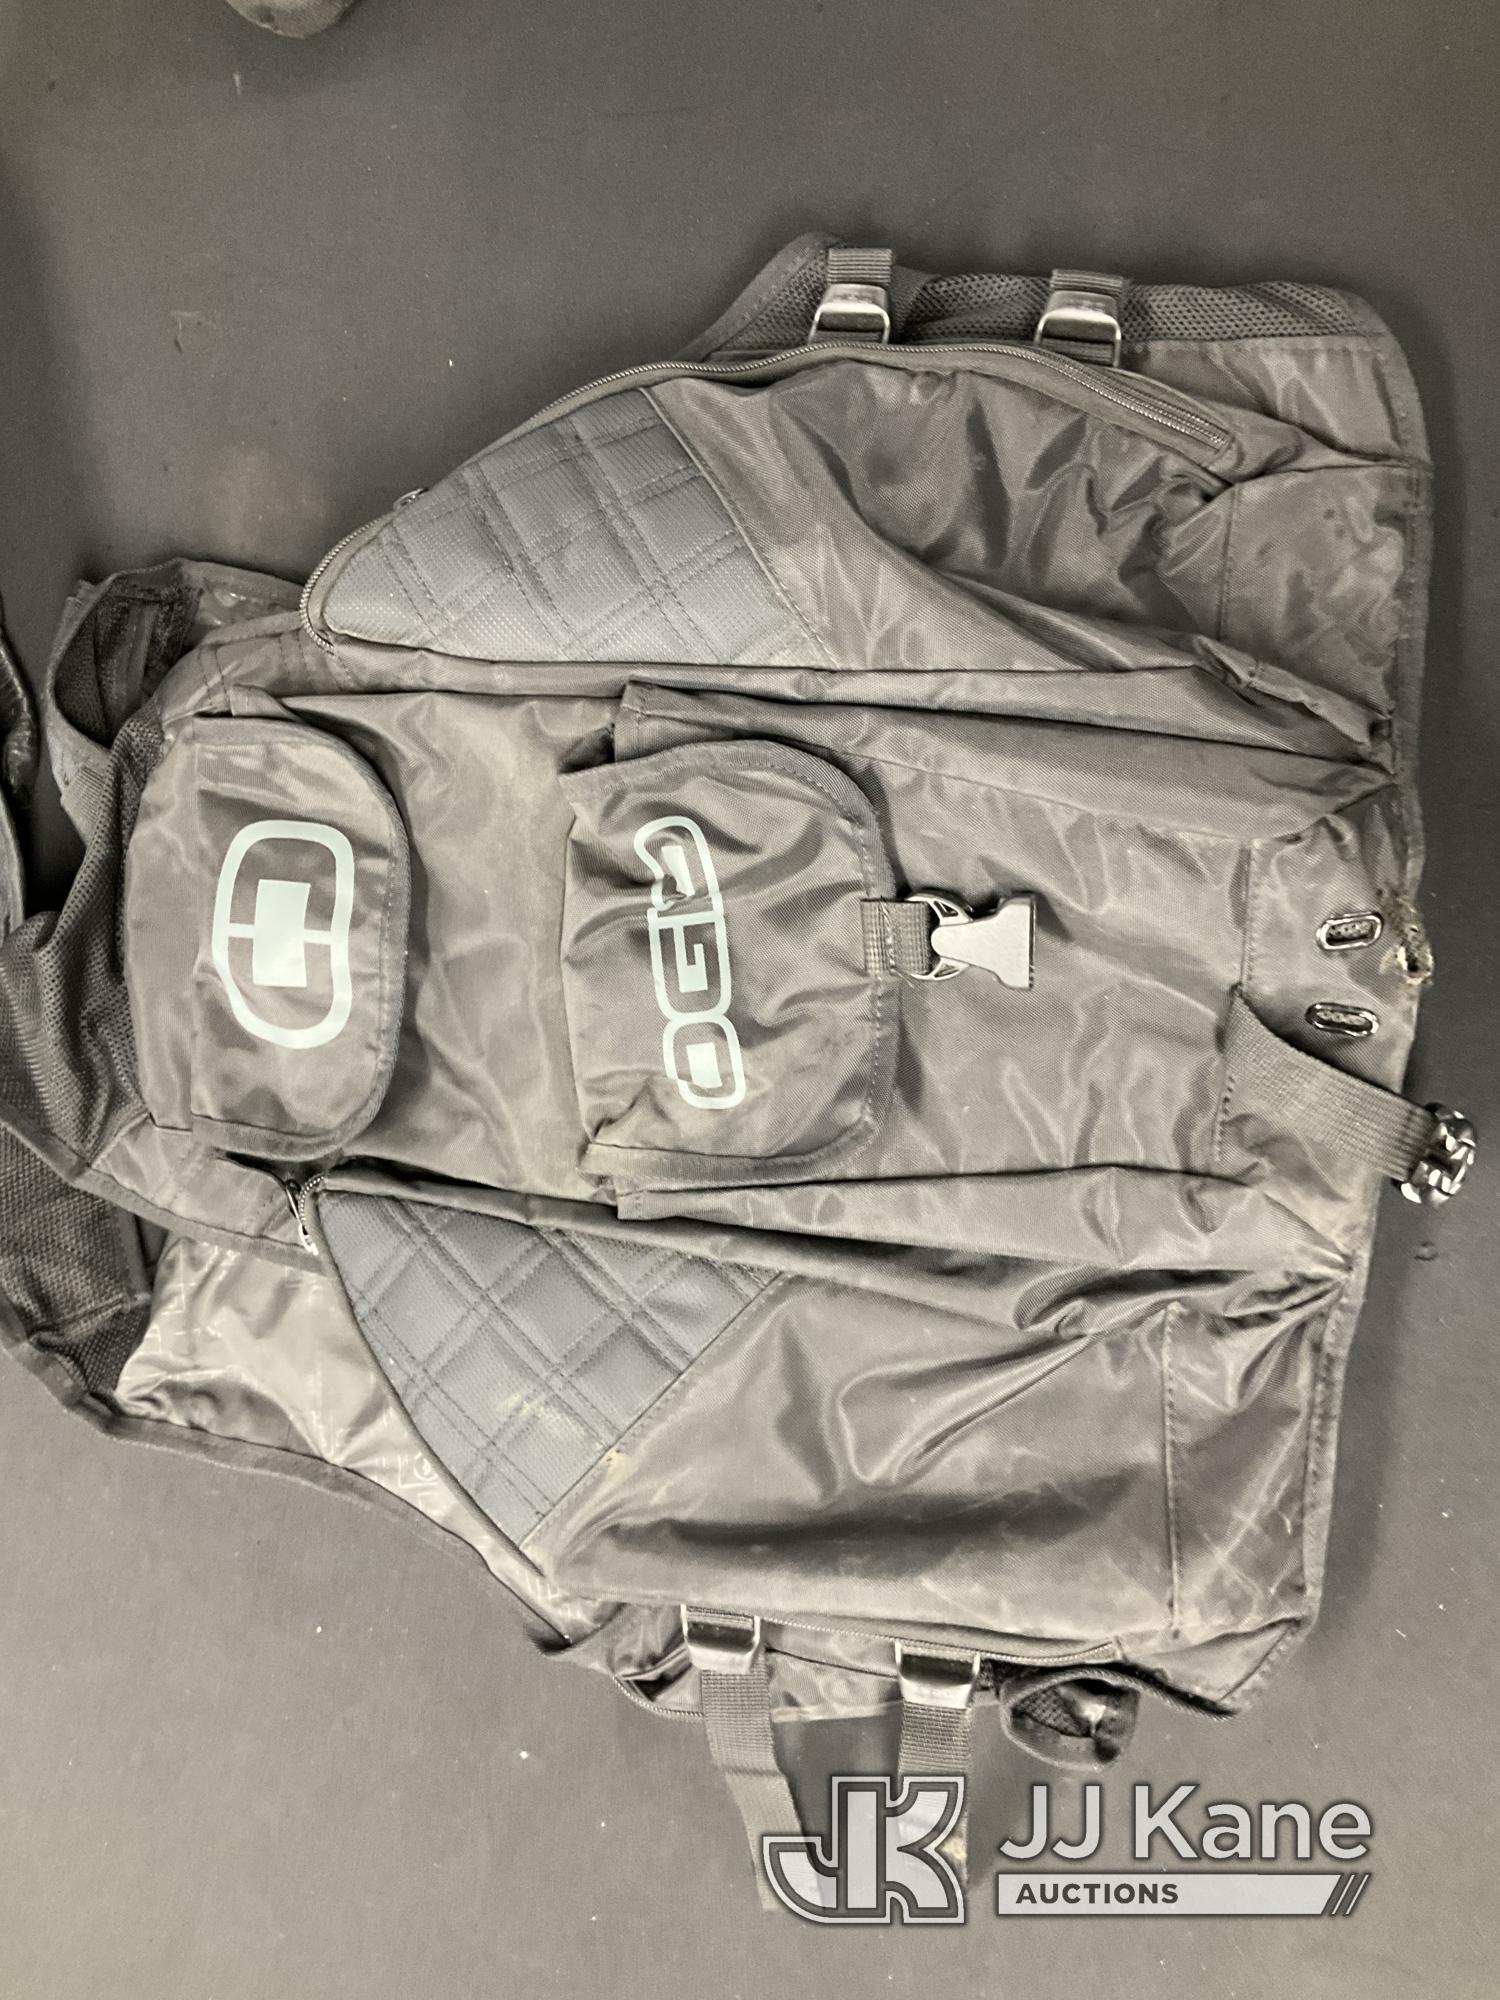 (Jurupa Valley, CA) Two Motorcycle Vests (Used) NOTE: This unit is being sold AS IS/WHERE IS via Tim